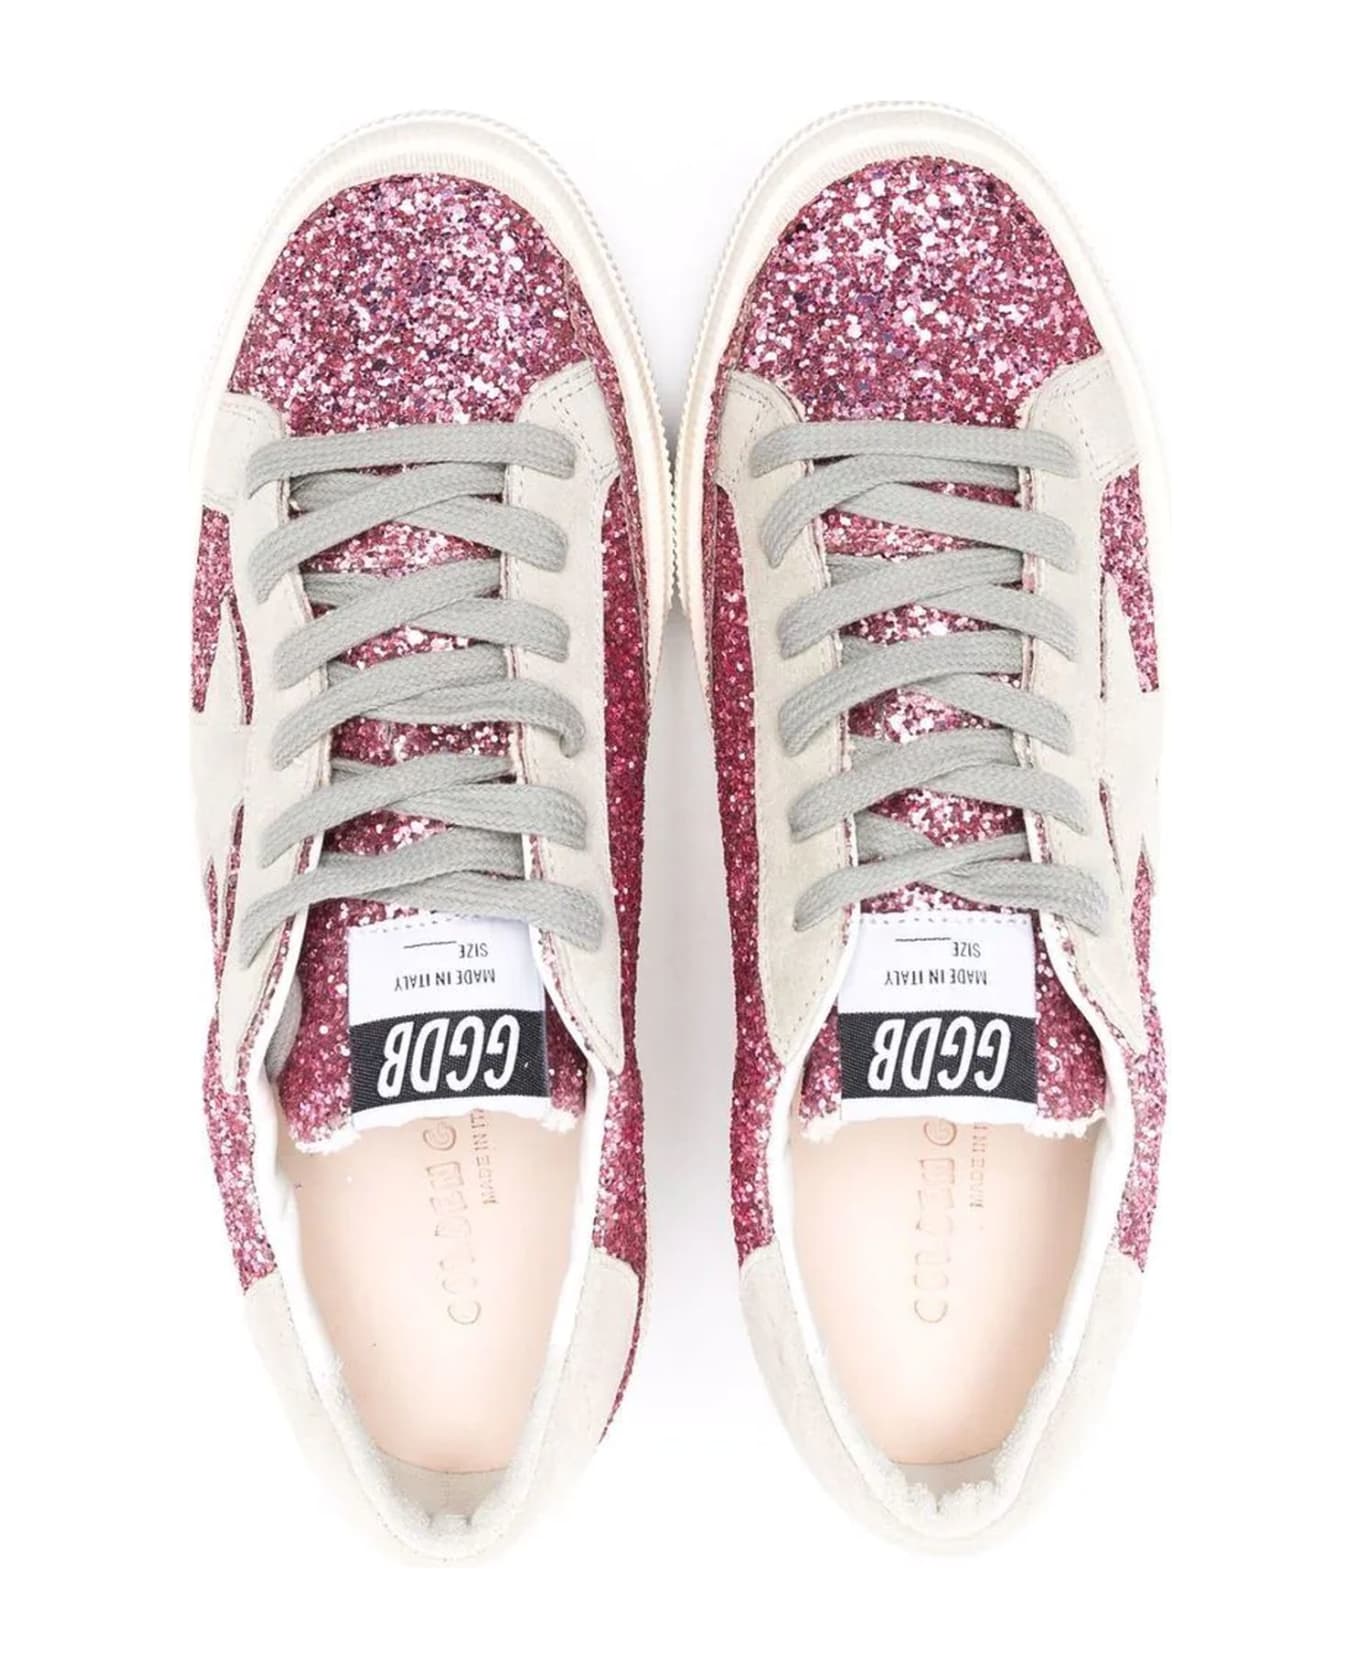 Golden Goose Pink Leather Sneakers - Rosa